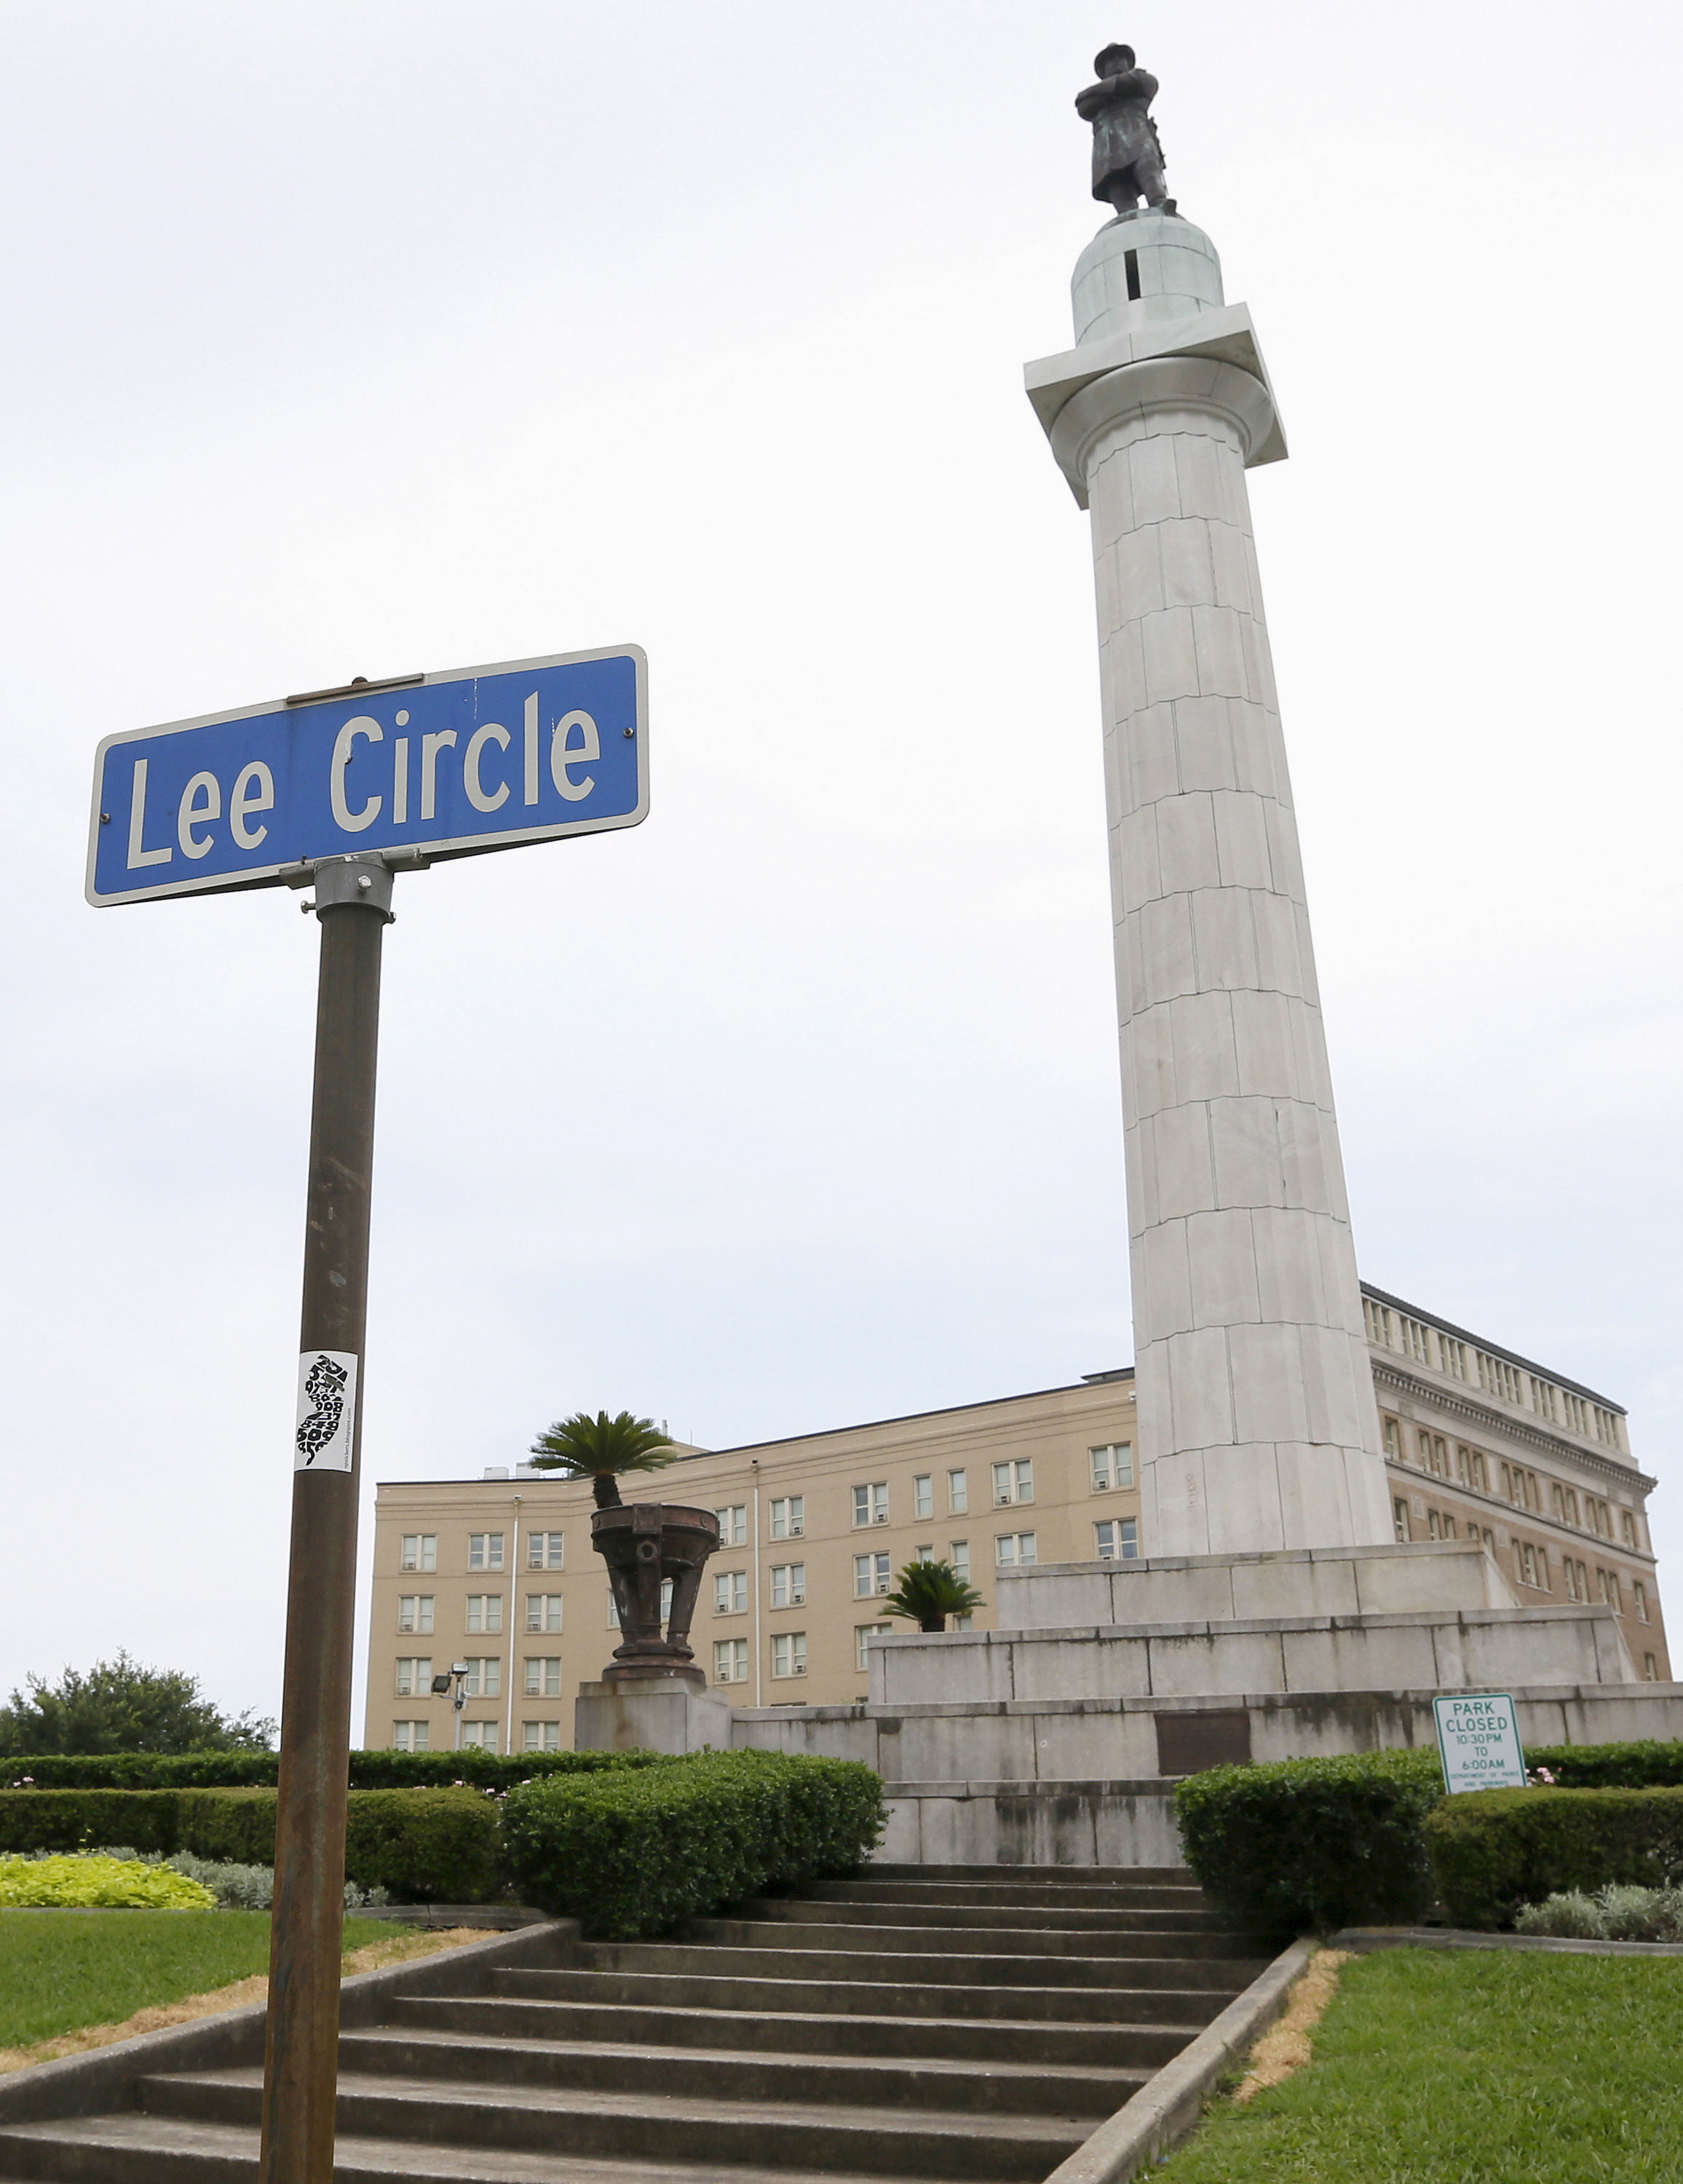 New Orleans Mayor: Let's Remove Confederate Symbols from City | Time